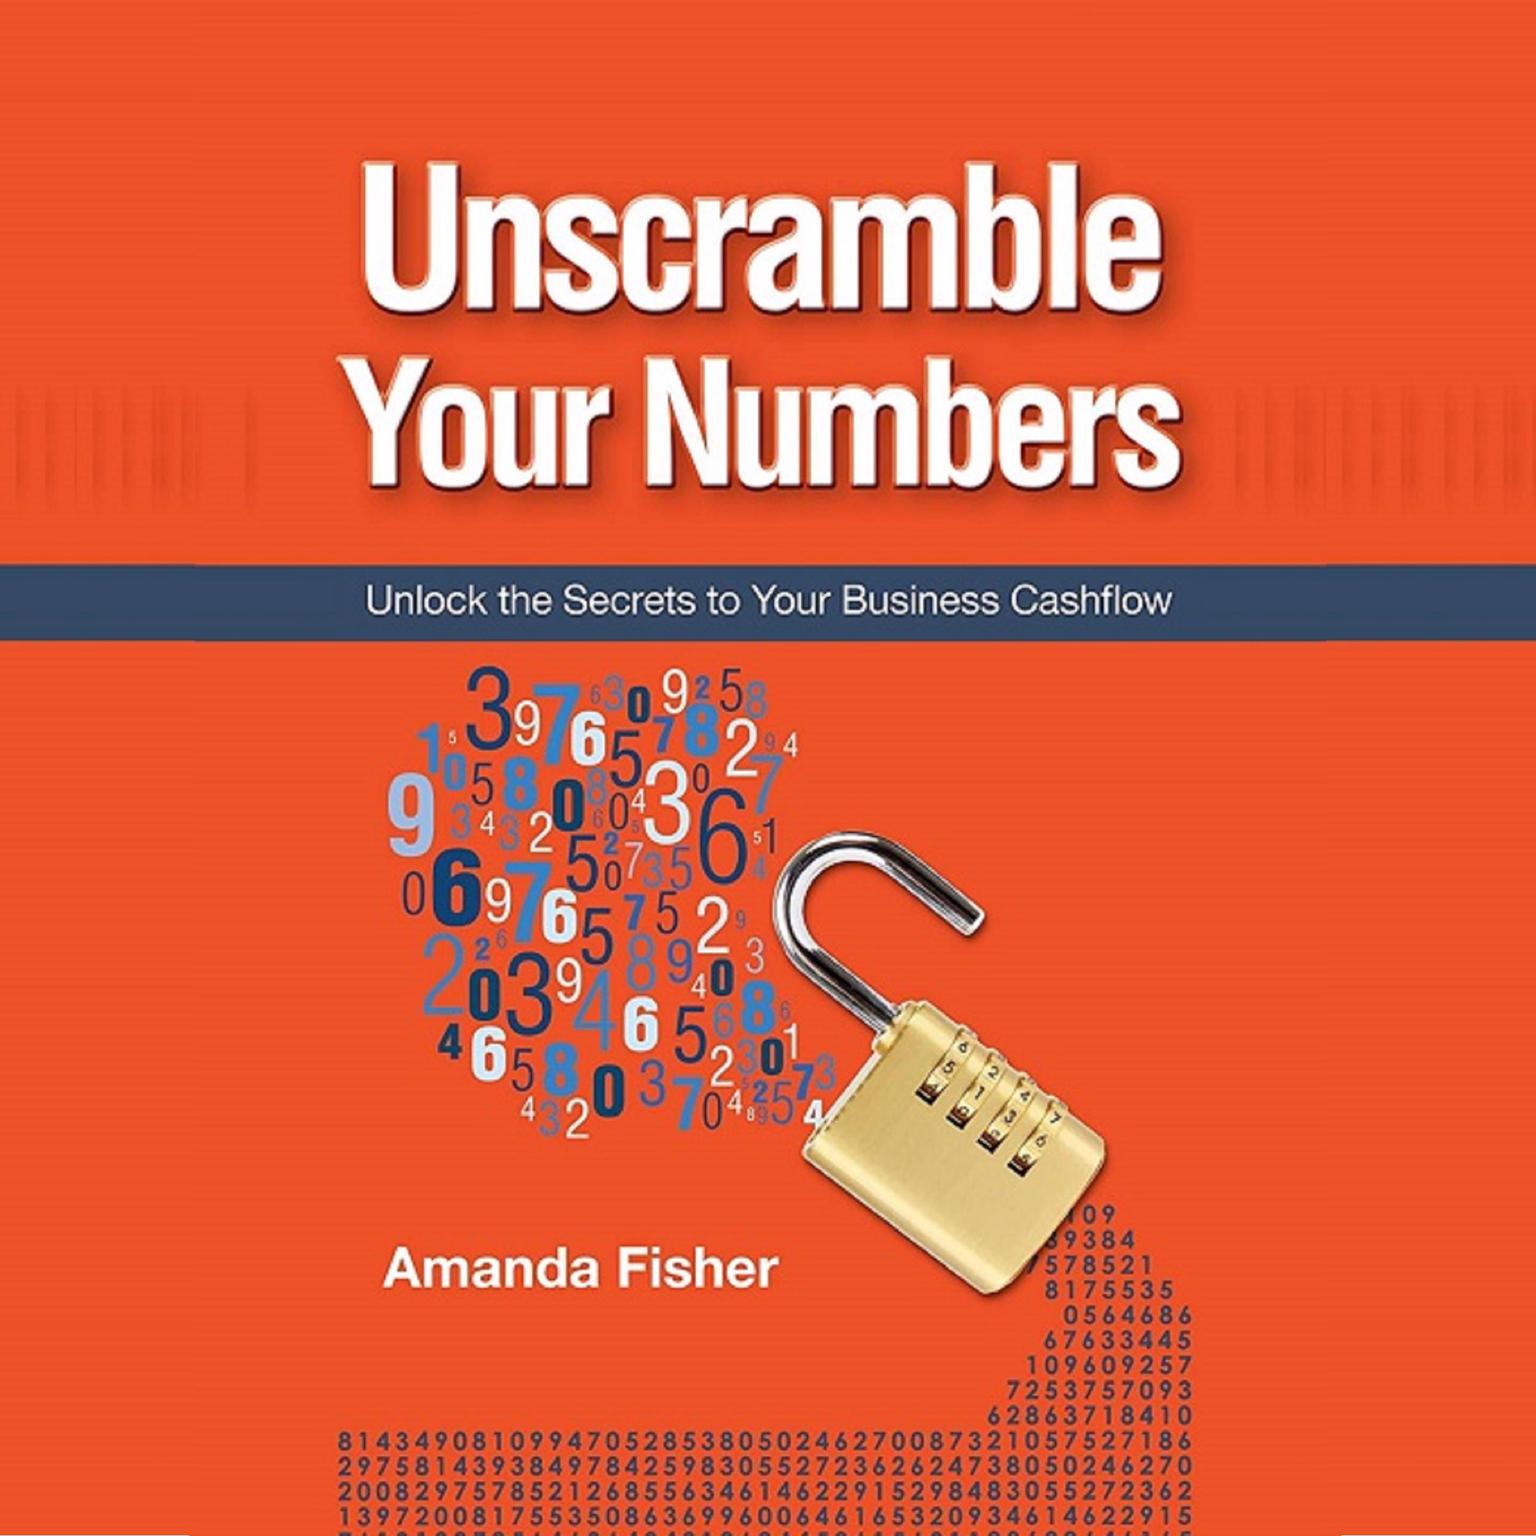 Unscramble your numbers - unlock the secrets to your business cashflow Audiobook, by Amanda Fisher